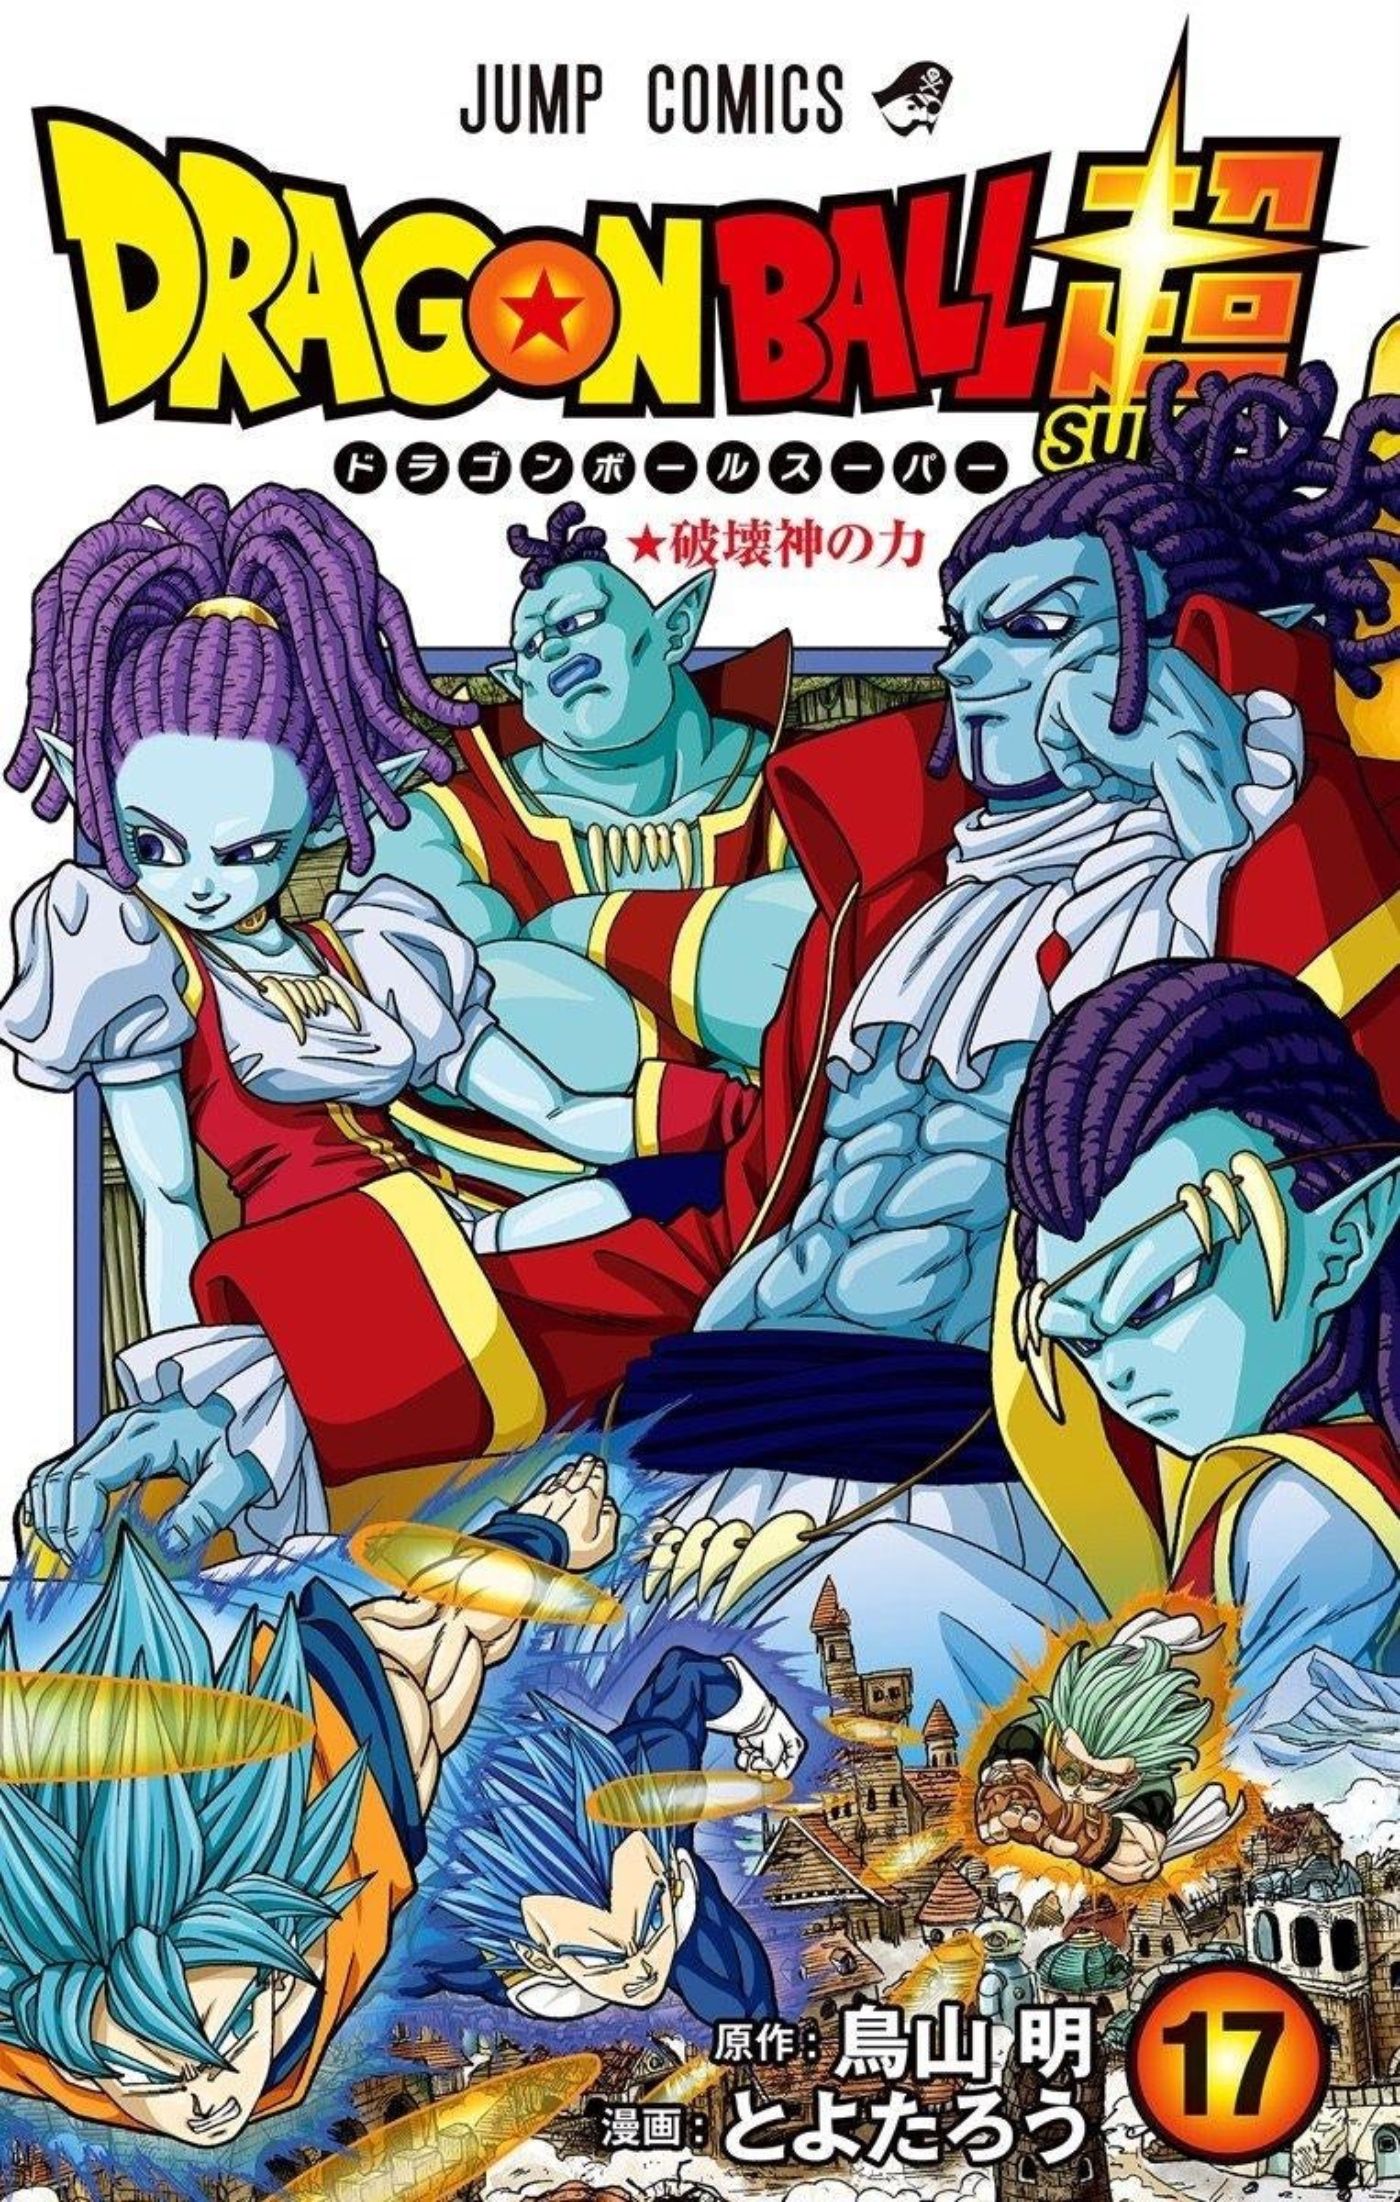 Dragon Ball Super Highlights the Heeters’ True Power in New Cover Art